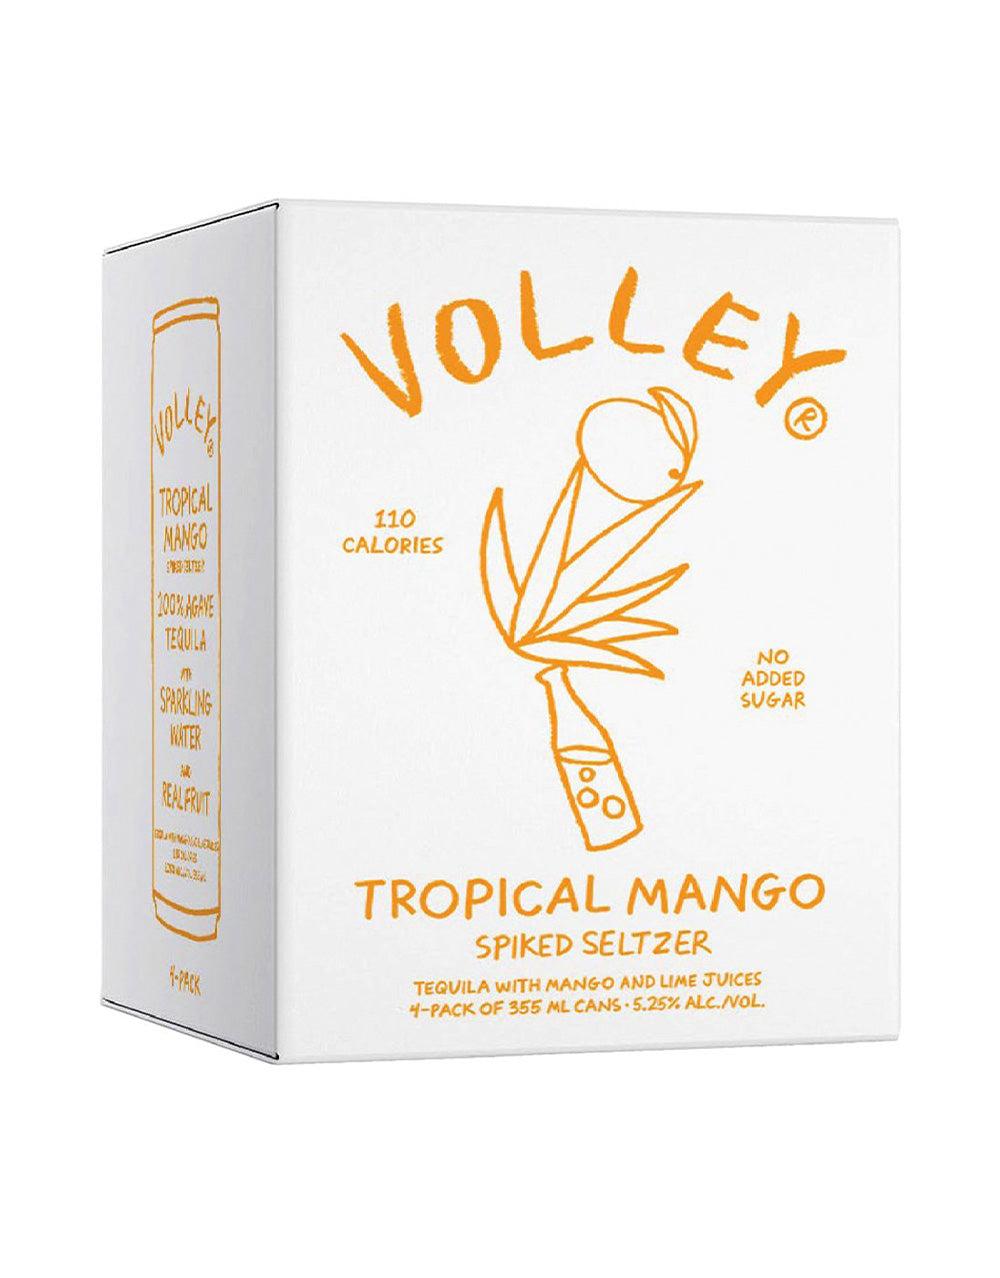 Volley Tropical Mango Tequila Seltzer